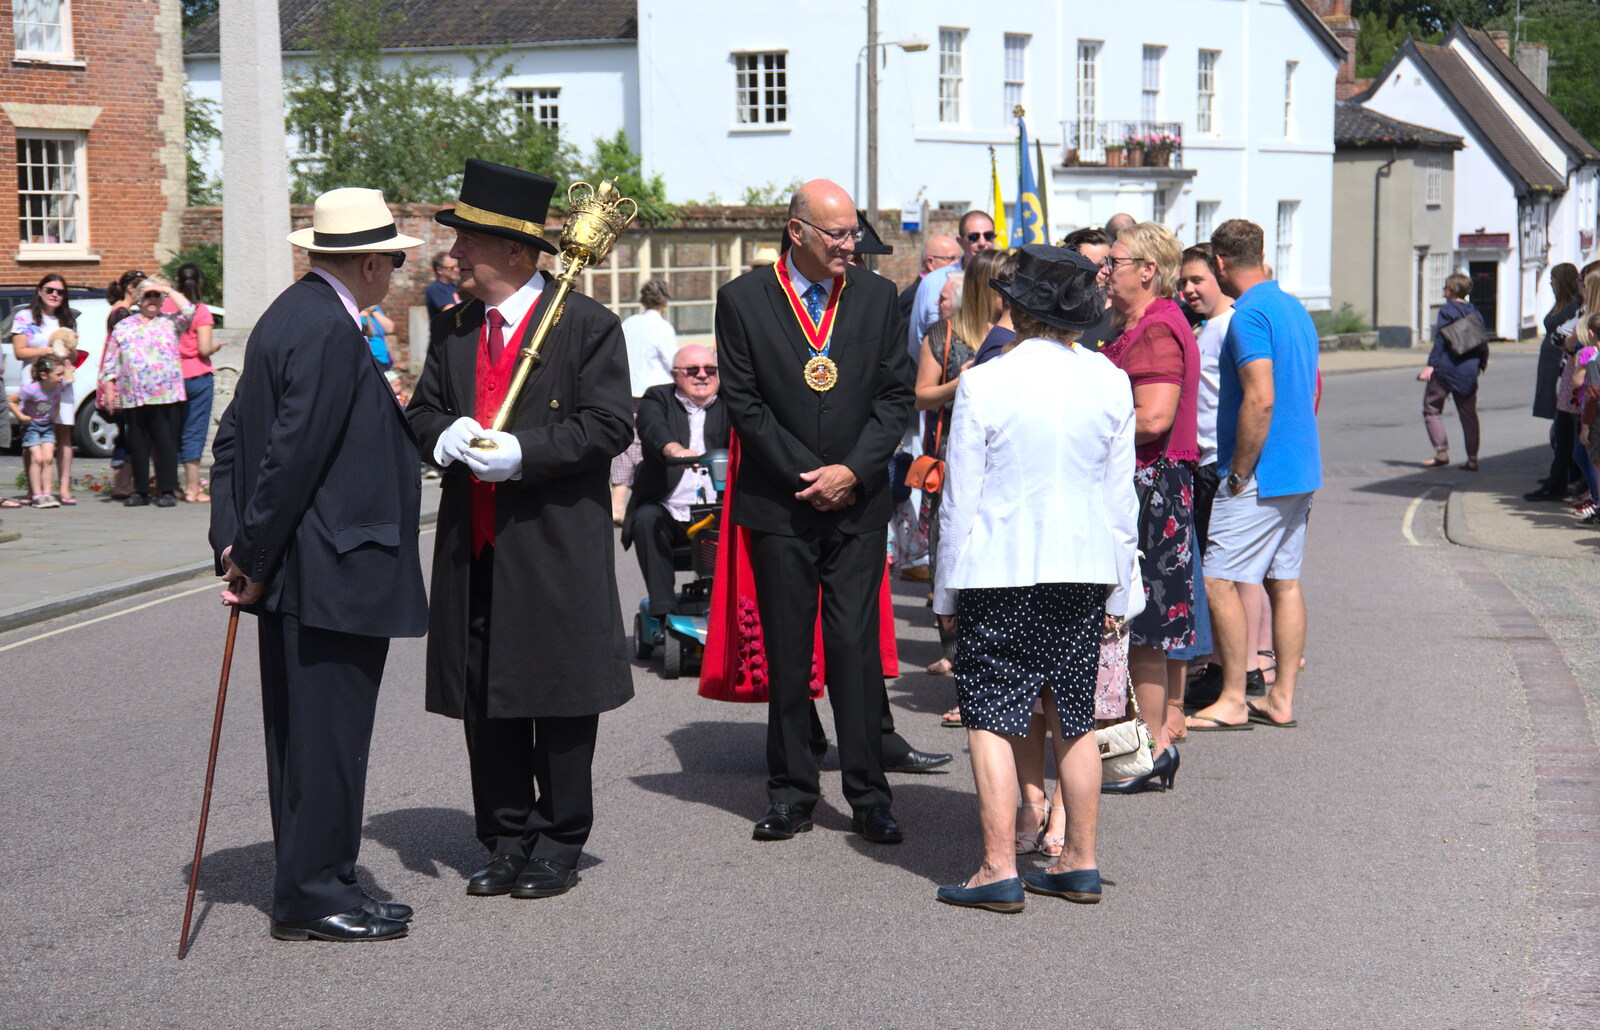 More chatting before the parade moves off from The Mayor Making Parade, Eye, Suffolk - 24th June 2018